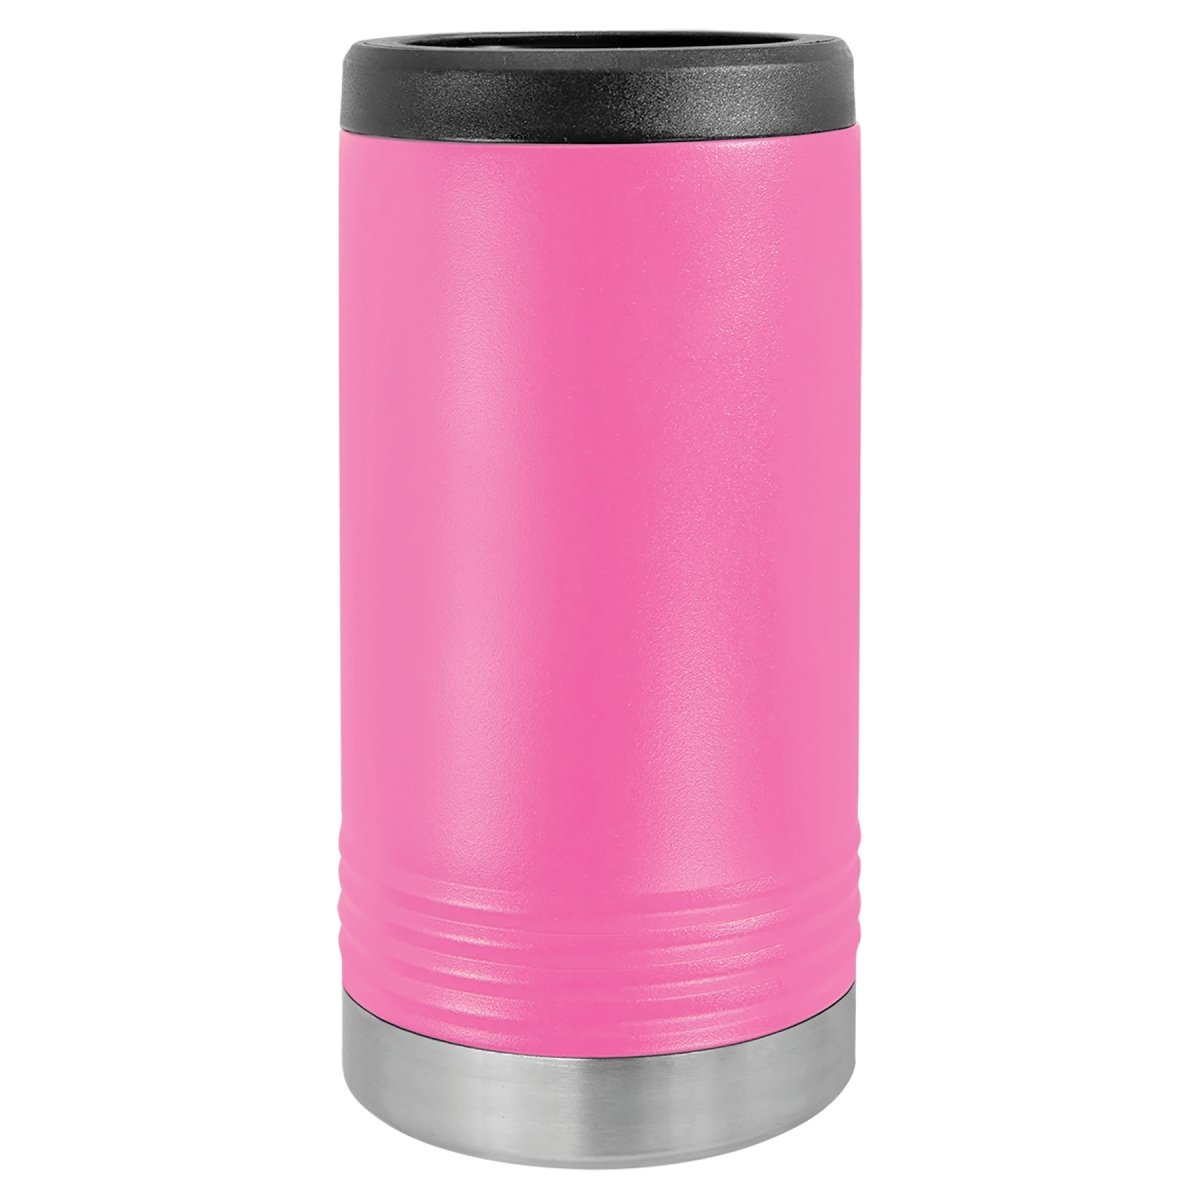 Slim Stainless Steel Beverage Holders for Skinny Cans - The Luua Company